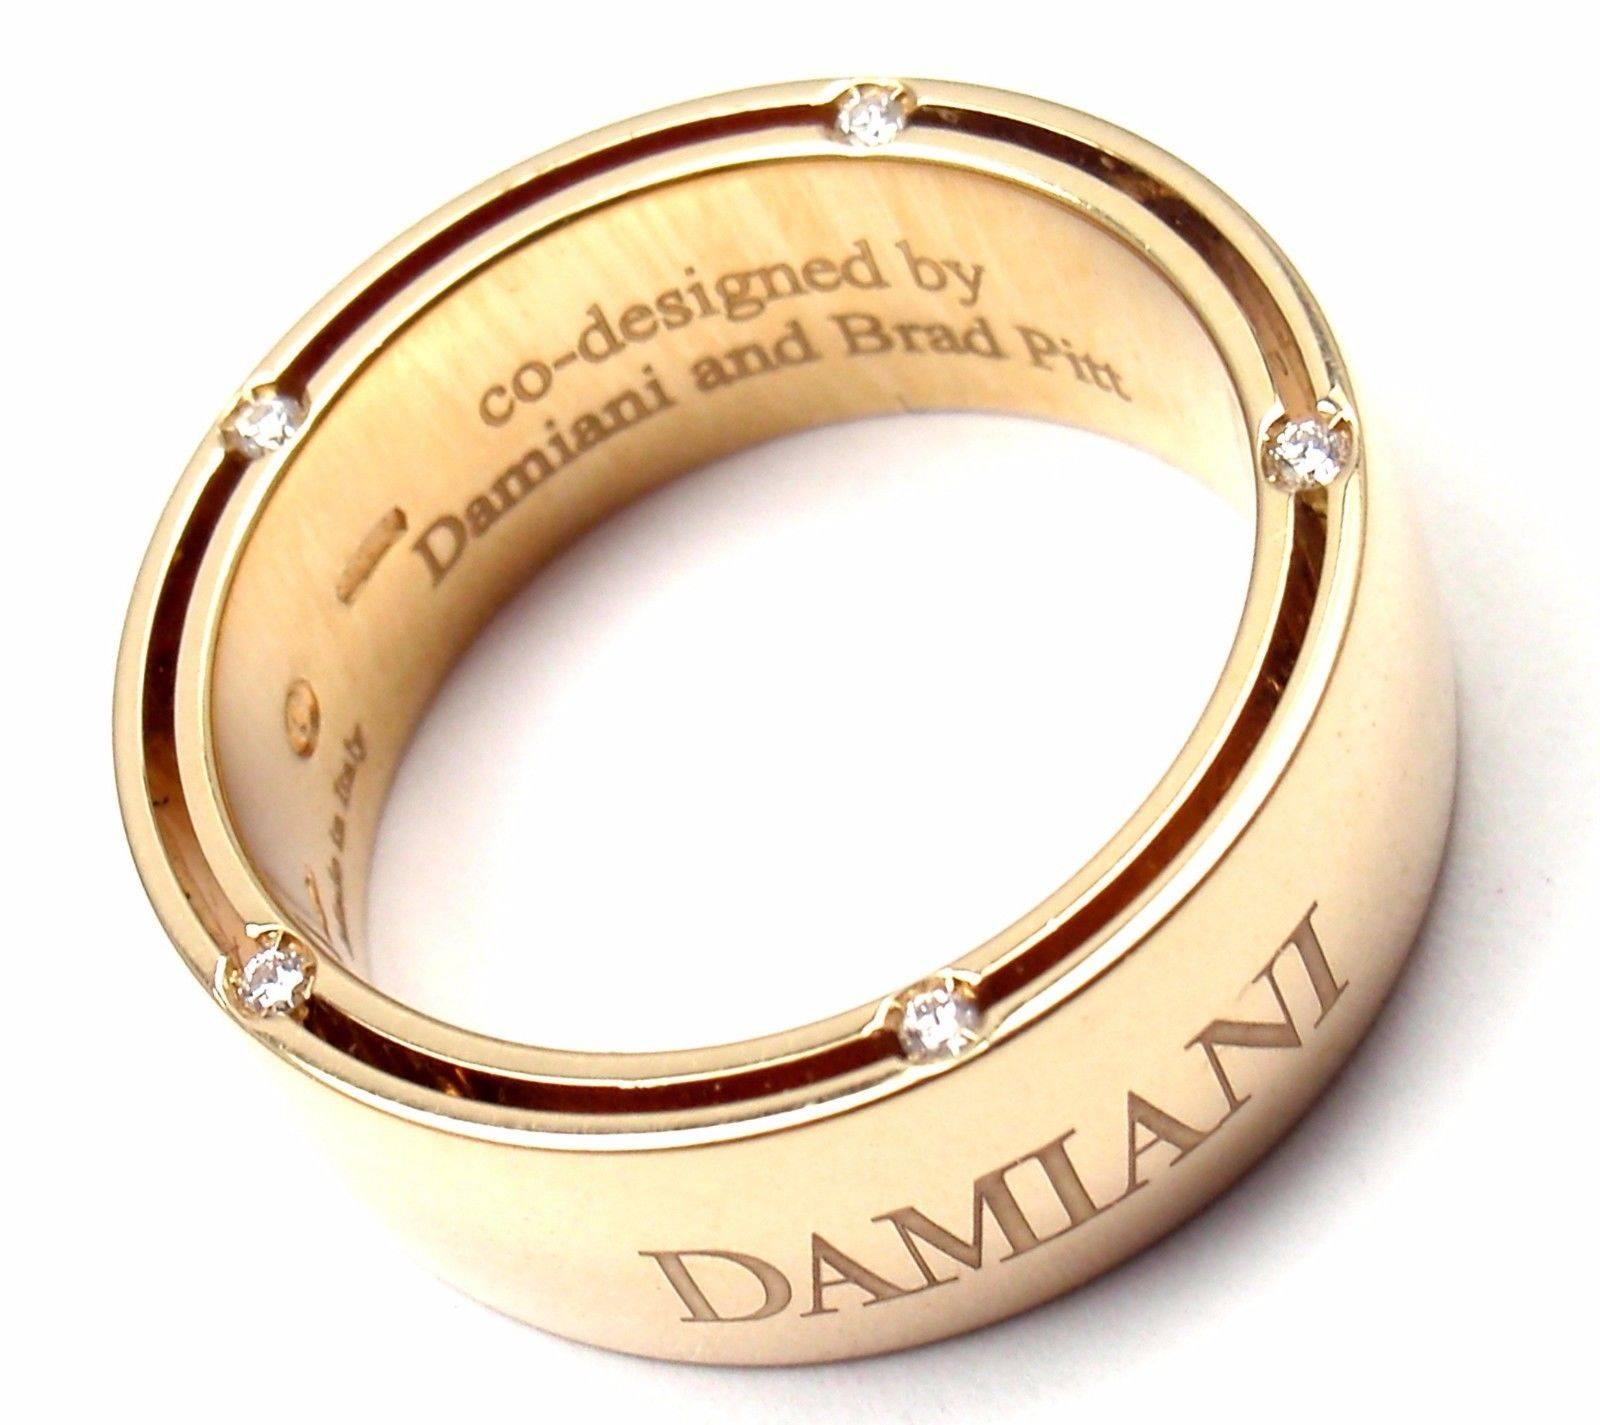 18k Yellow Gold Diamond Band Ring by Damiani And Brad Pitt.
With 5 round brilliant cut diamonds total weight approx .10ct VS1 clarity, G color.
Retail Price: $3,590
This ring comes with Damiani Box + Paperwork.
Details:
Size:  7
Weight: 11.9